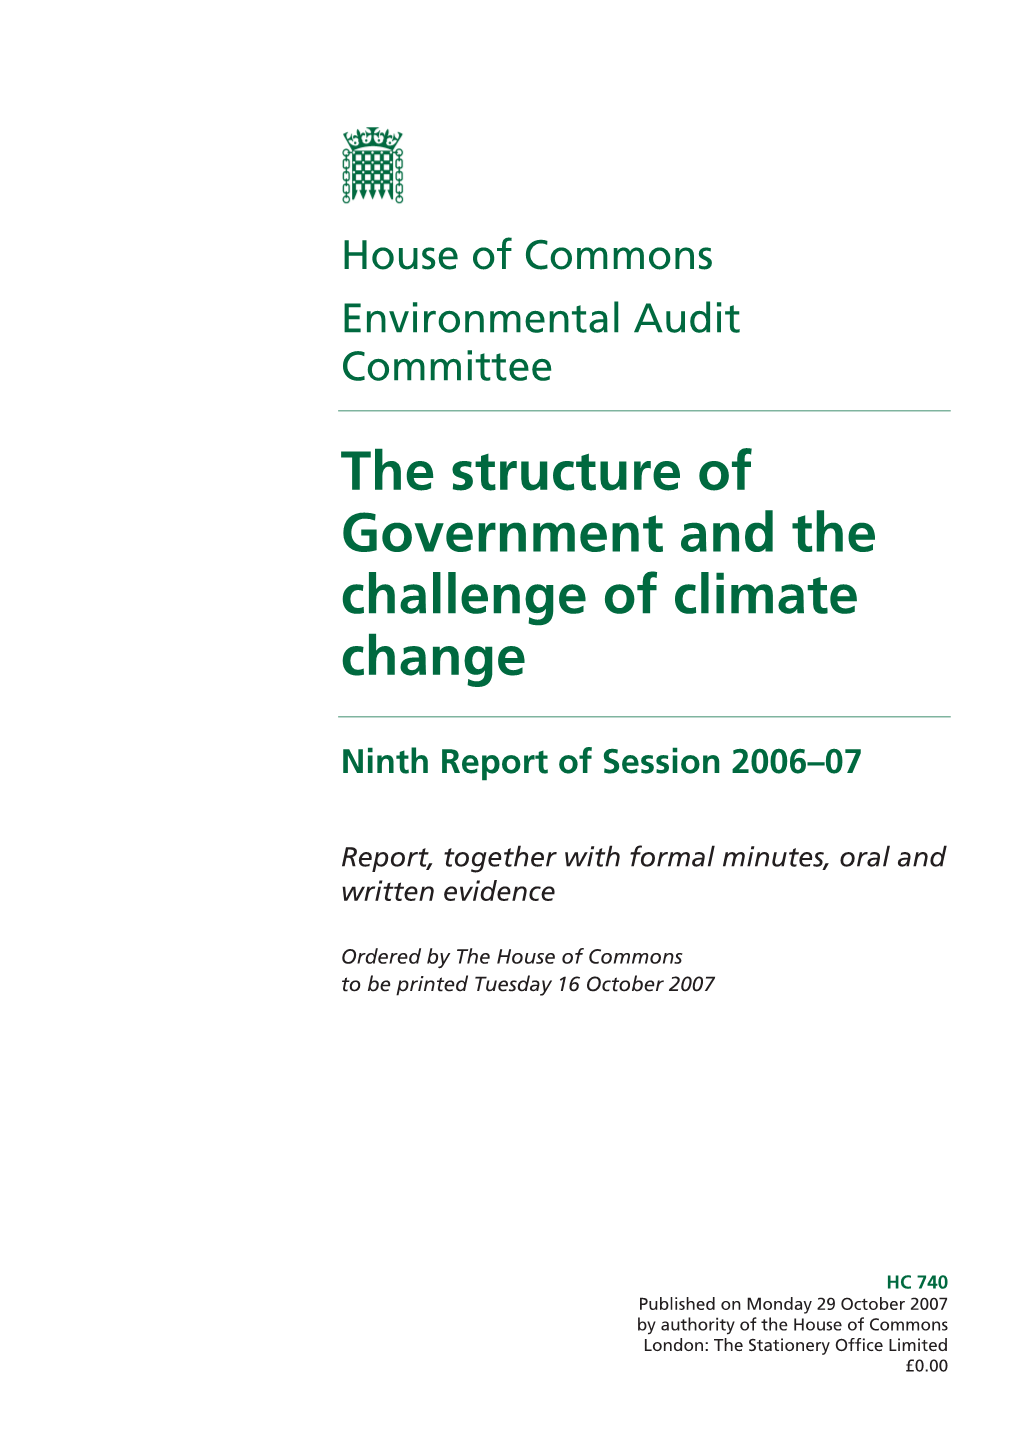 The Structure of Government and the Challenge of Climate Change